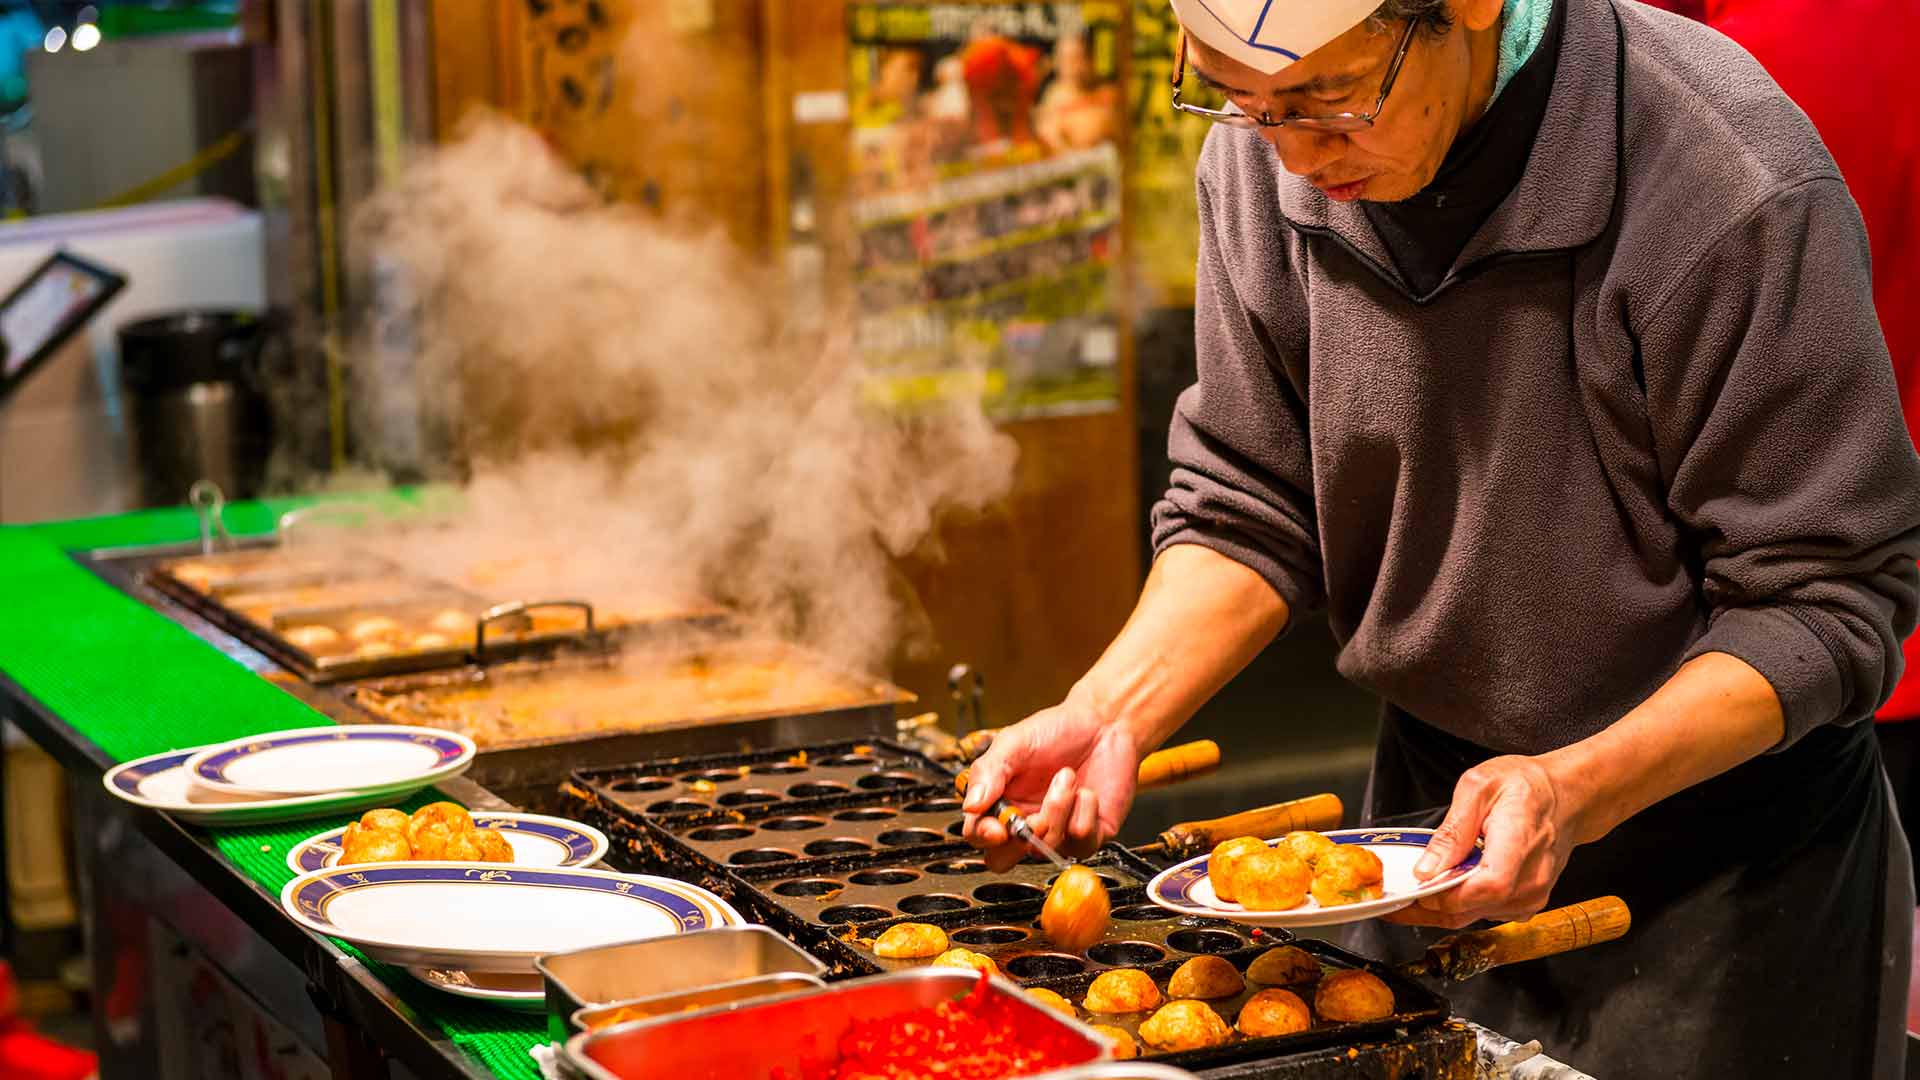 Gorge on the Street Food: A Culinary Adventure